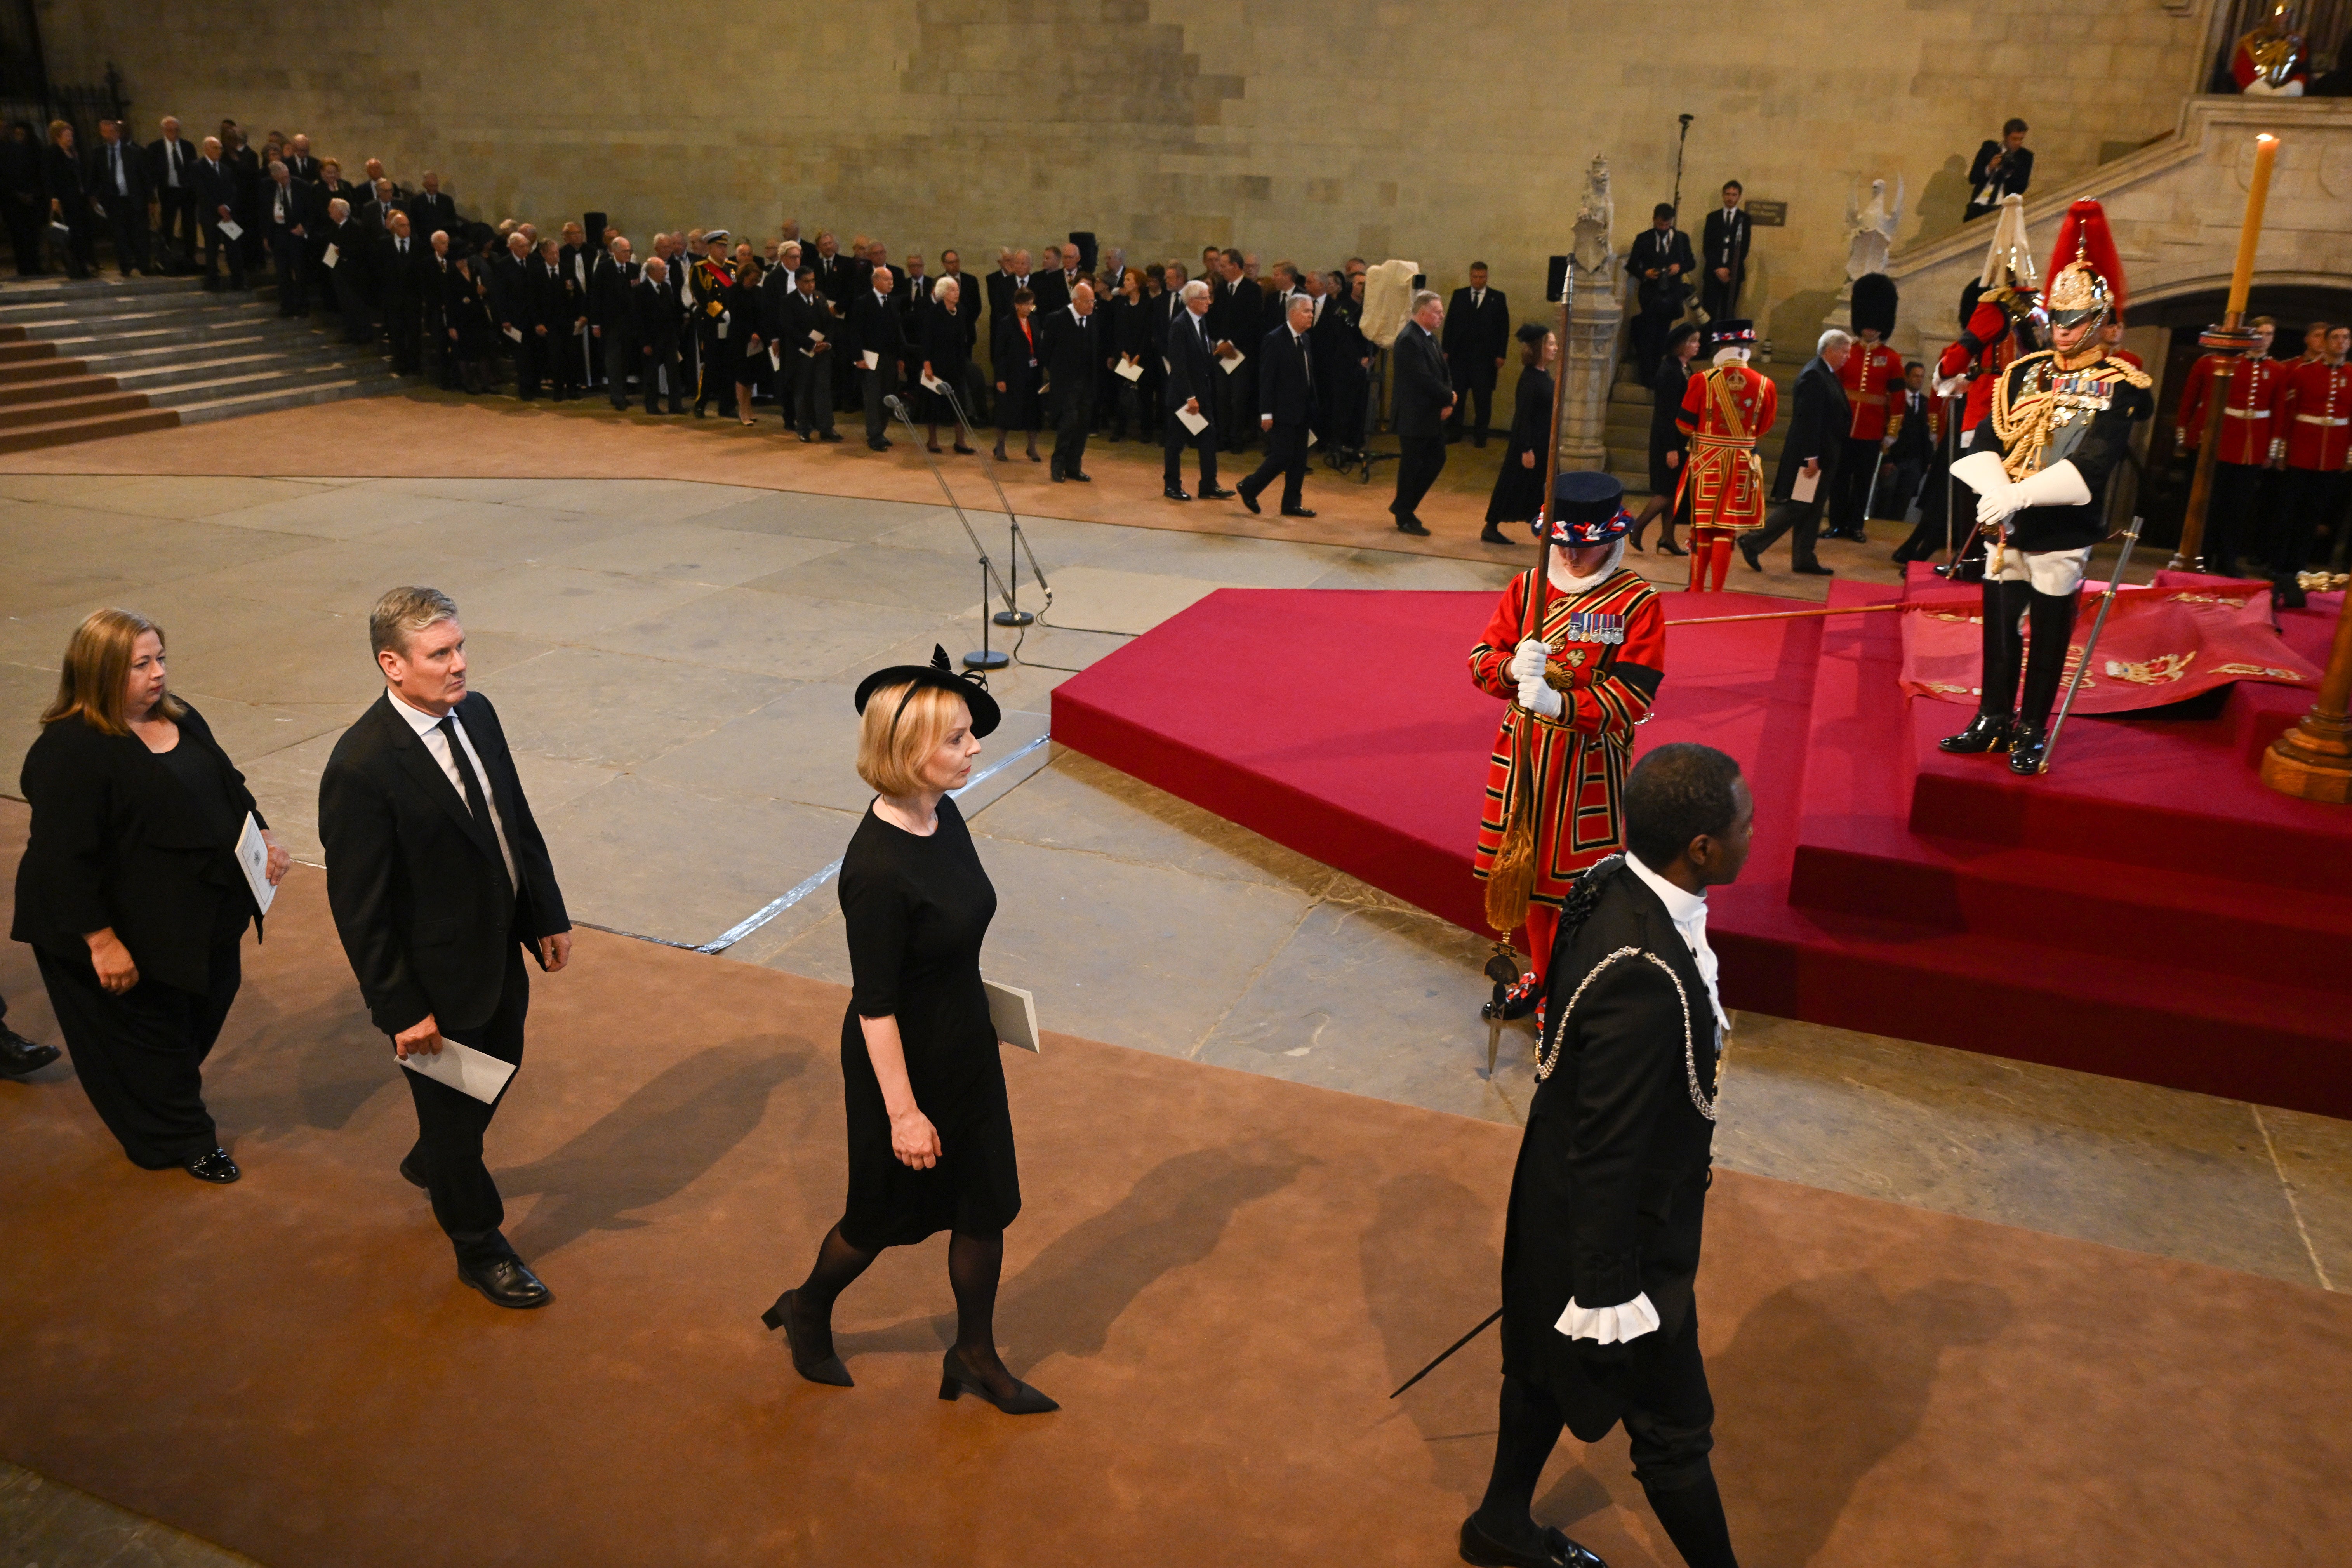 Prime Minister Liz Truss in Westminster Hall, where the Queen is lying in state (David Ramos/PA)